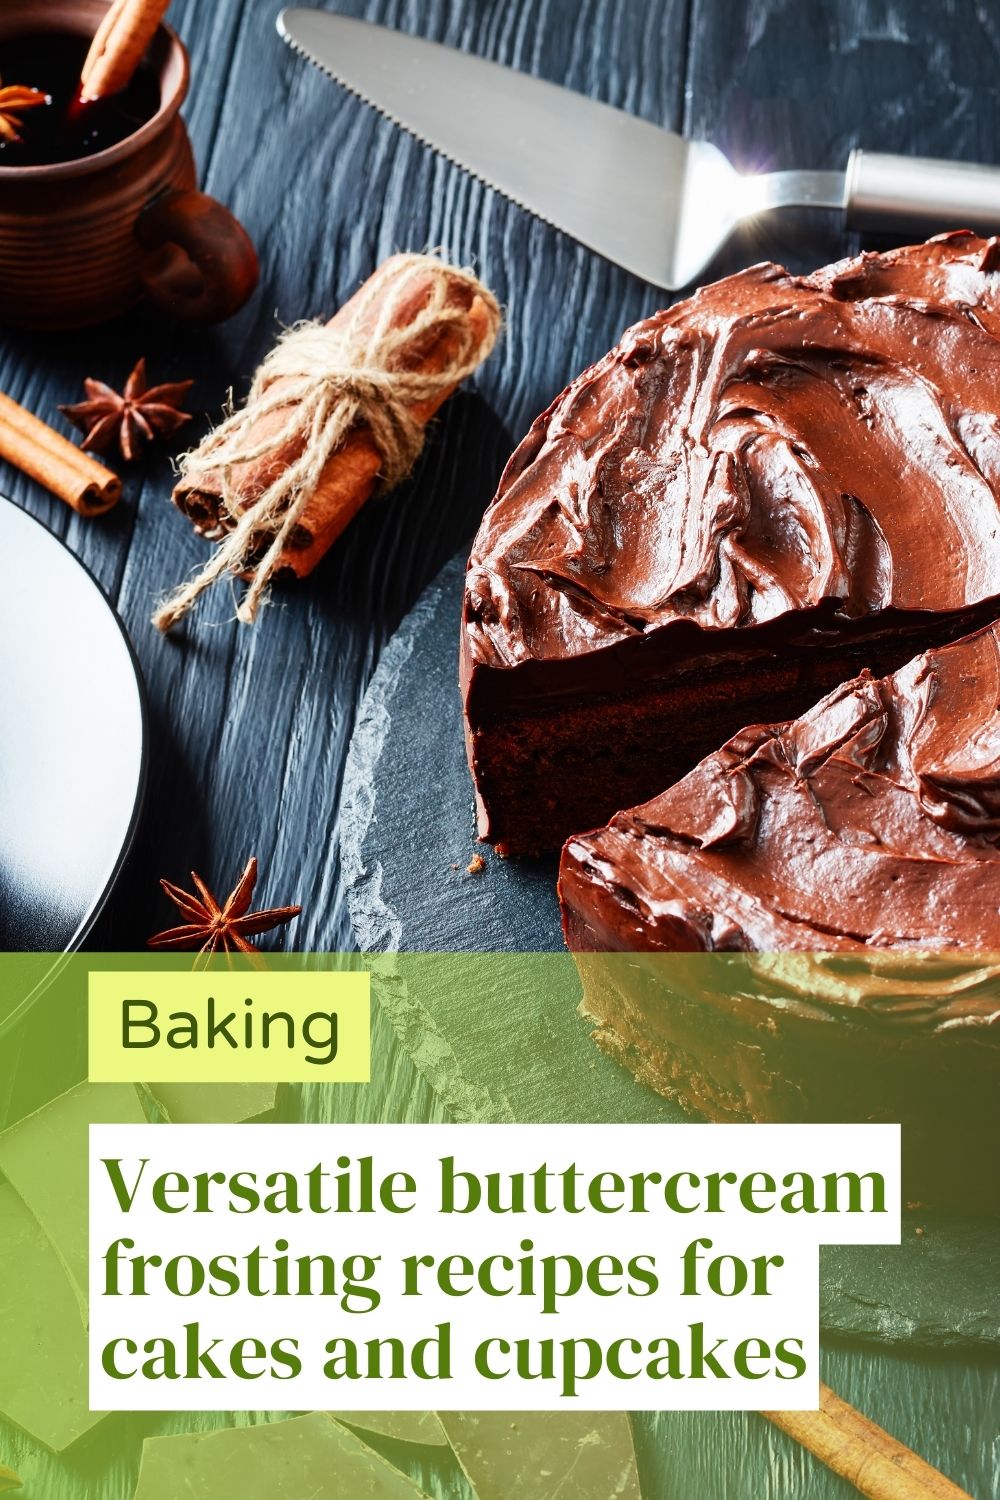 Versatile buttercream frosting recipes for cakes and cupcakes